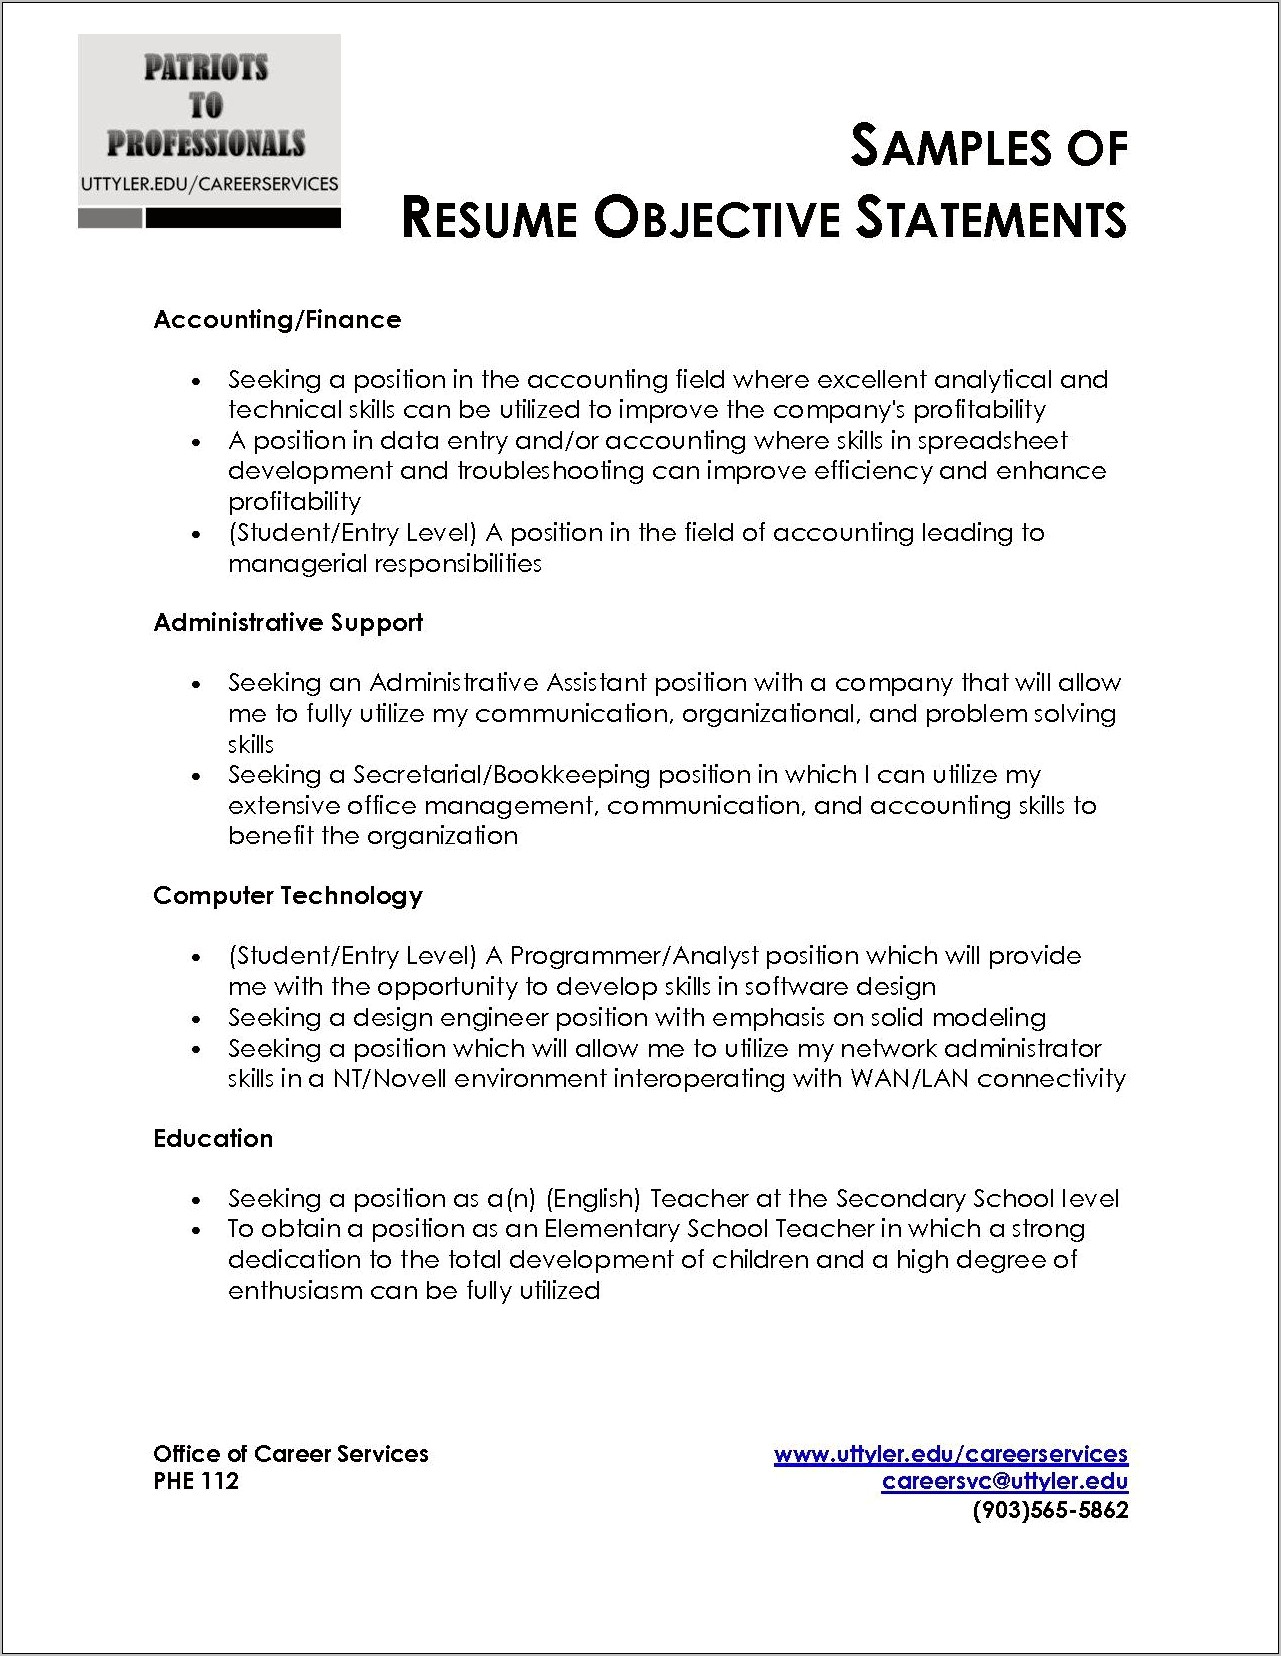 Free Examples Of Resume Objective Statements